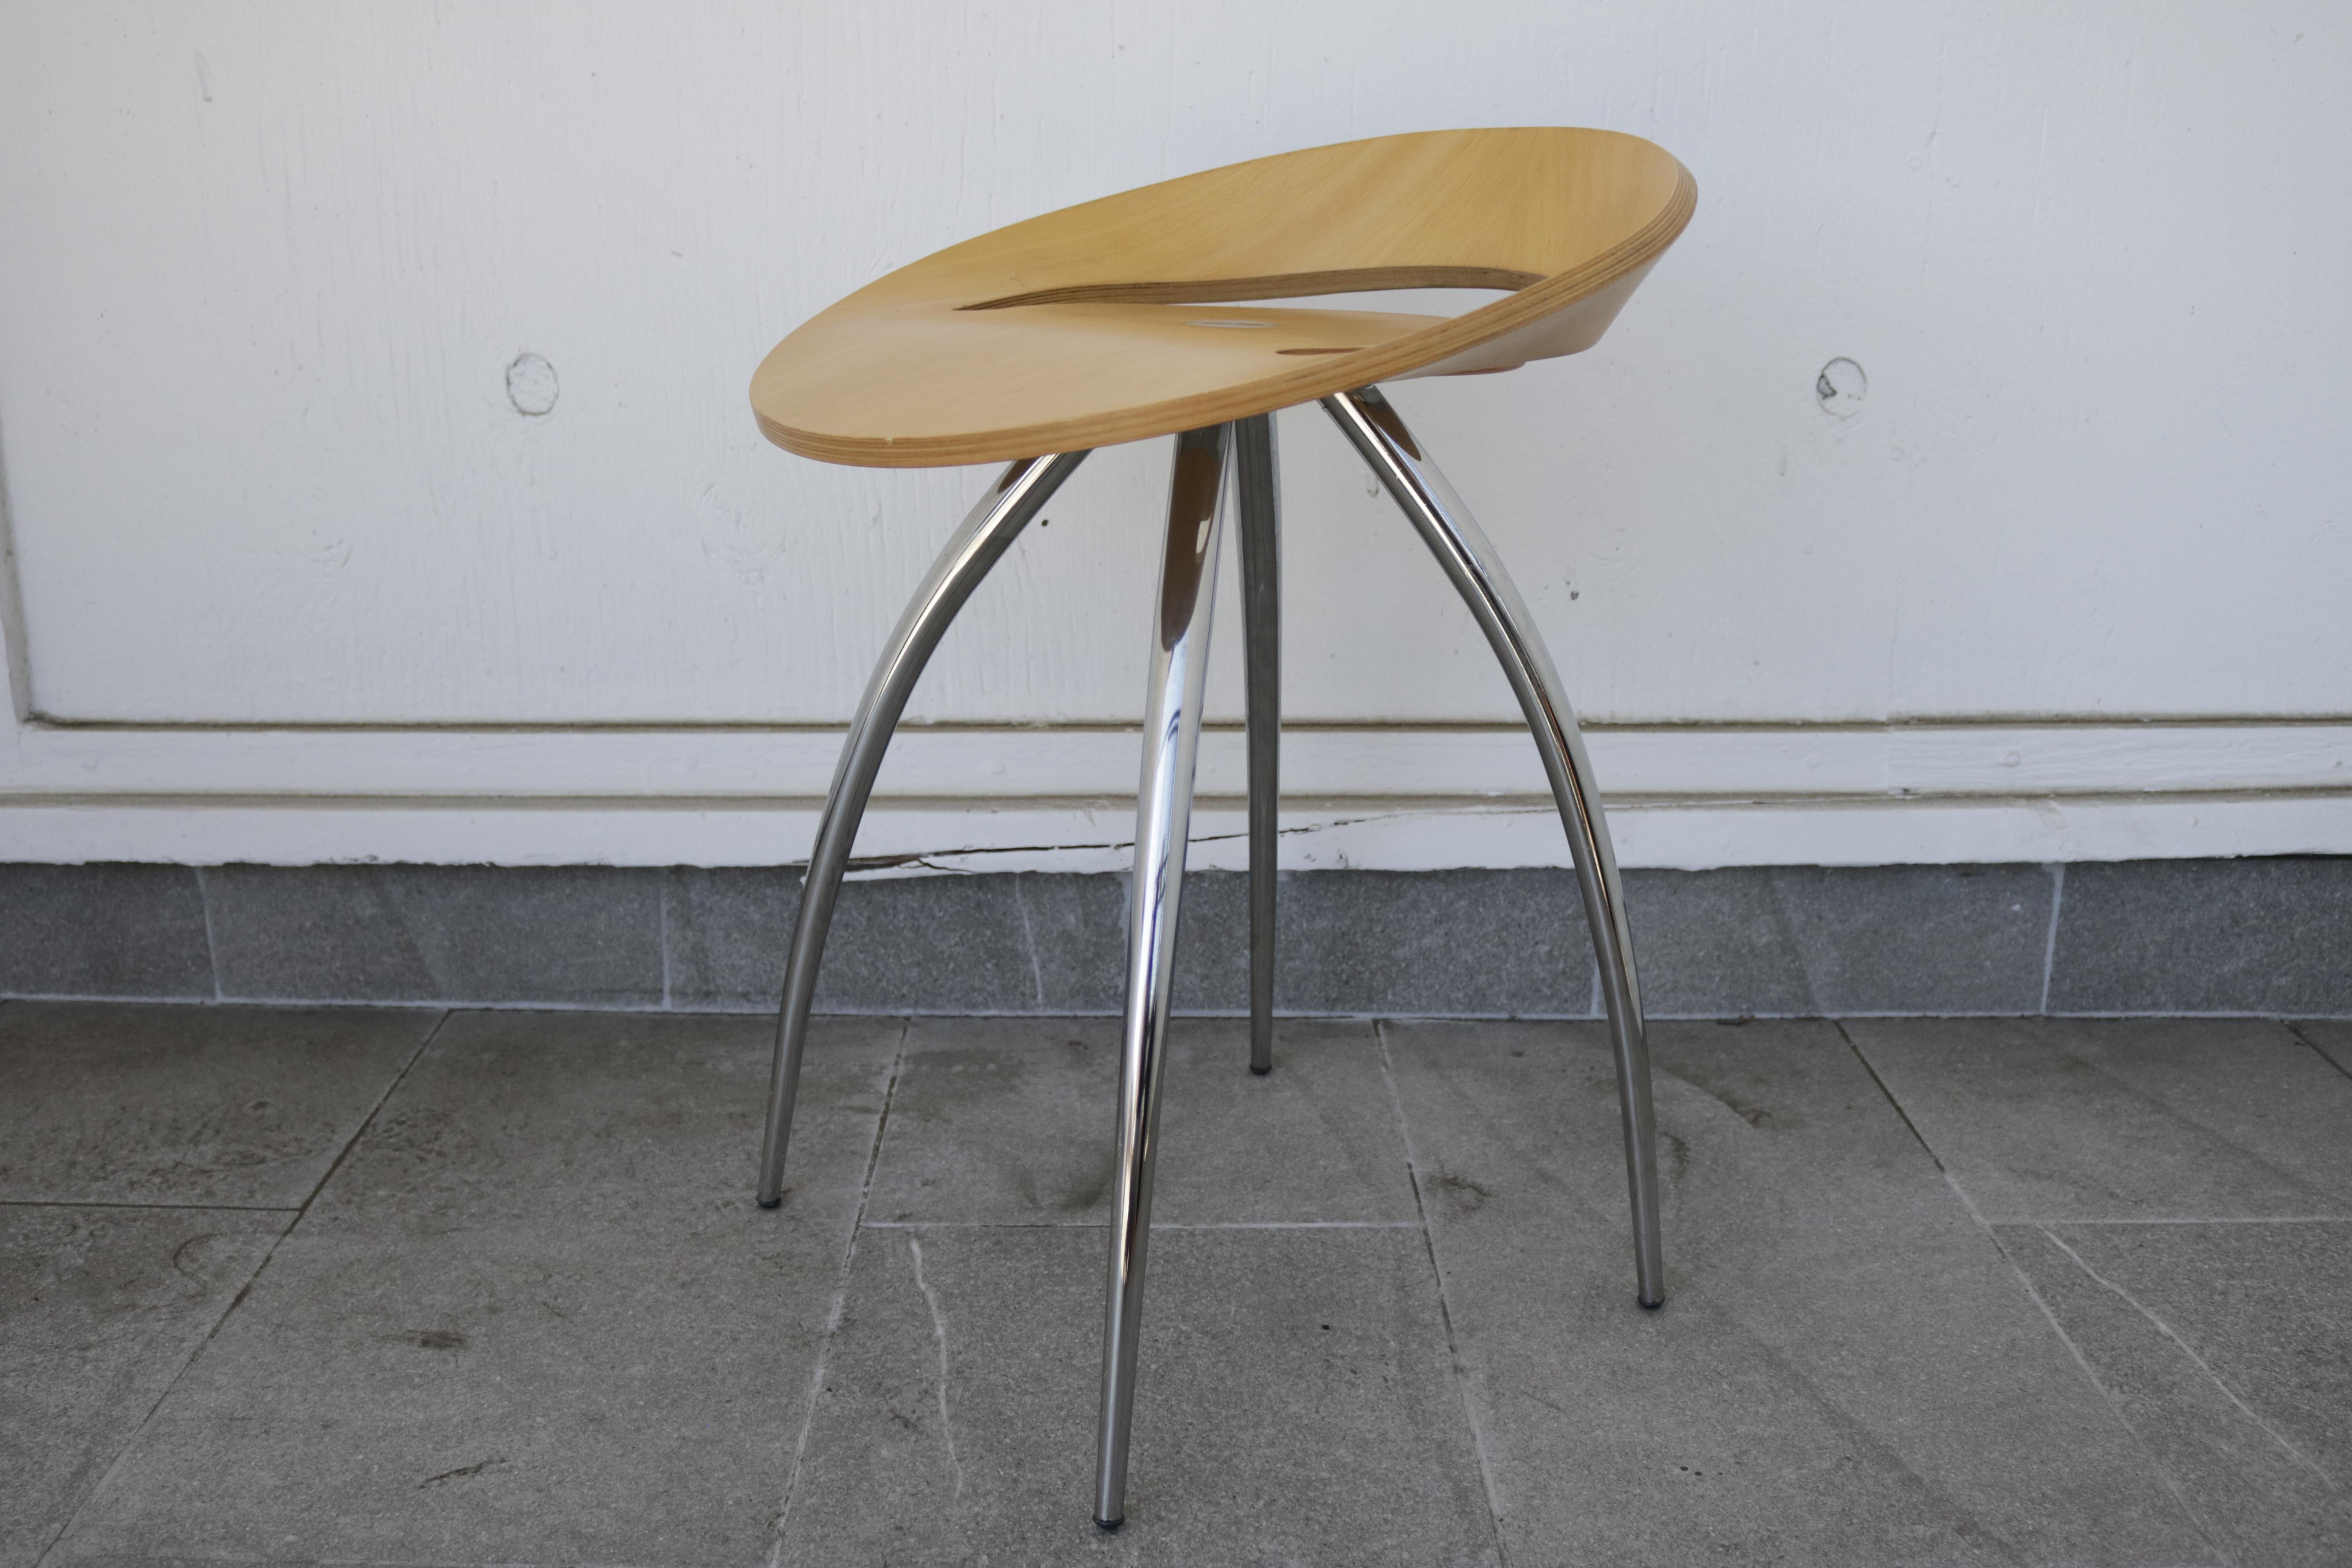 Set of chrome steel tubes and plywood stools by Magis.
The Lyra stool 79 was designed by the Design Group Italia for renowned Italian furniture specialist Magis.
Very comfortable laminated wood for the seat which follows the shape of the bottom